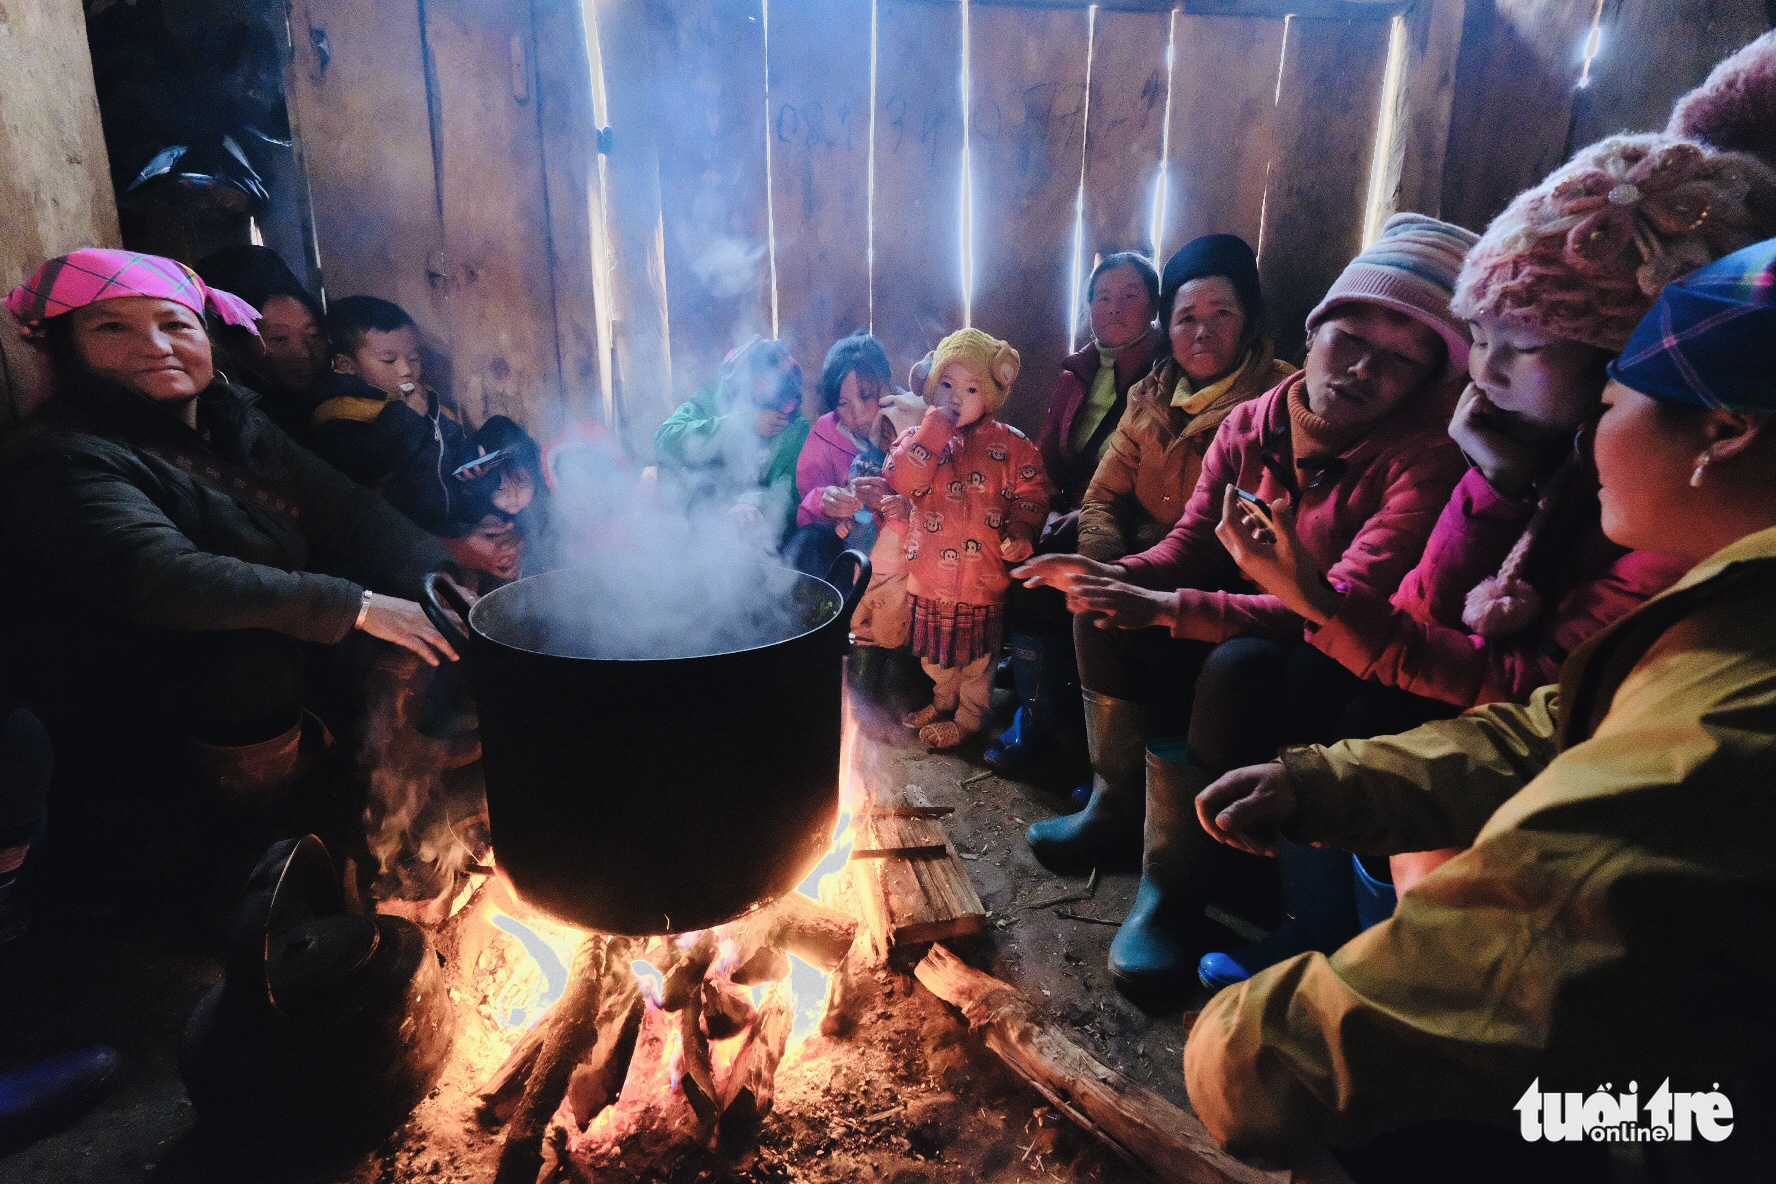 Family members sit by a firewood stove in Sa Pa, Lao Cai Province, Vietnam, December 31, 2020. Photo: Nam Tran / Tuoi Tre